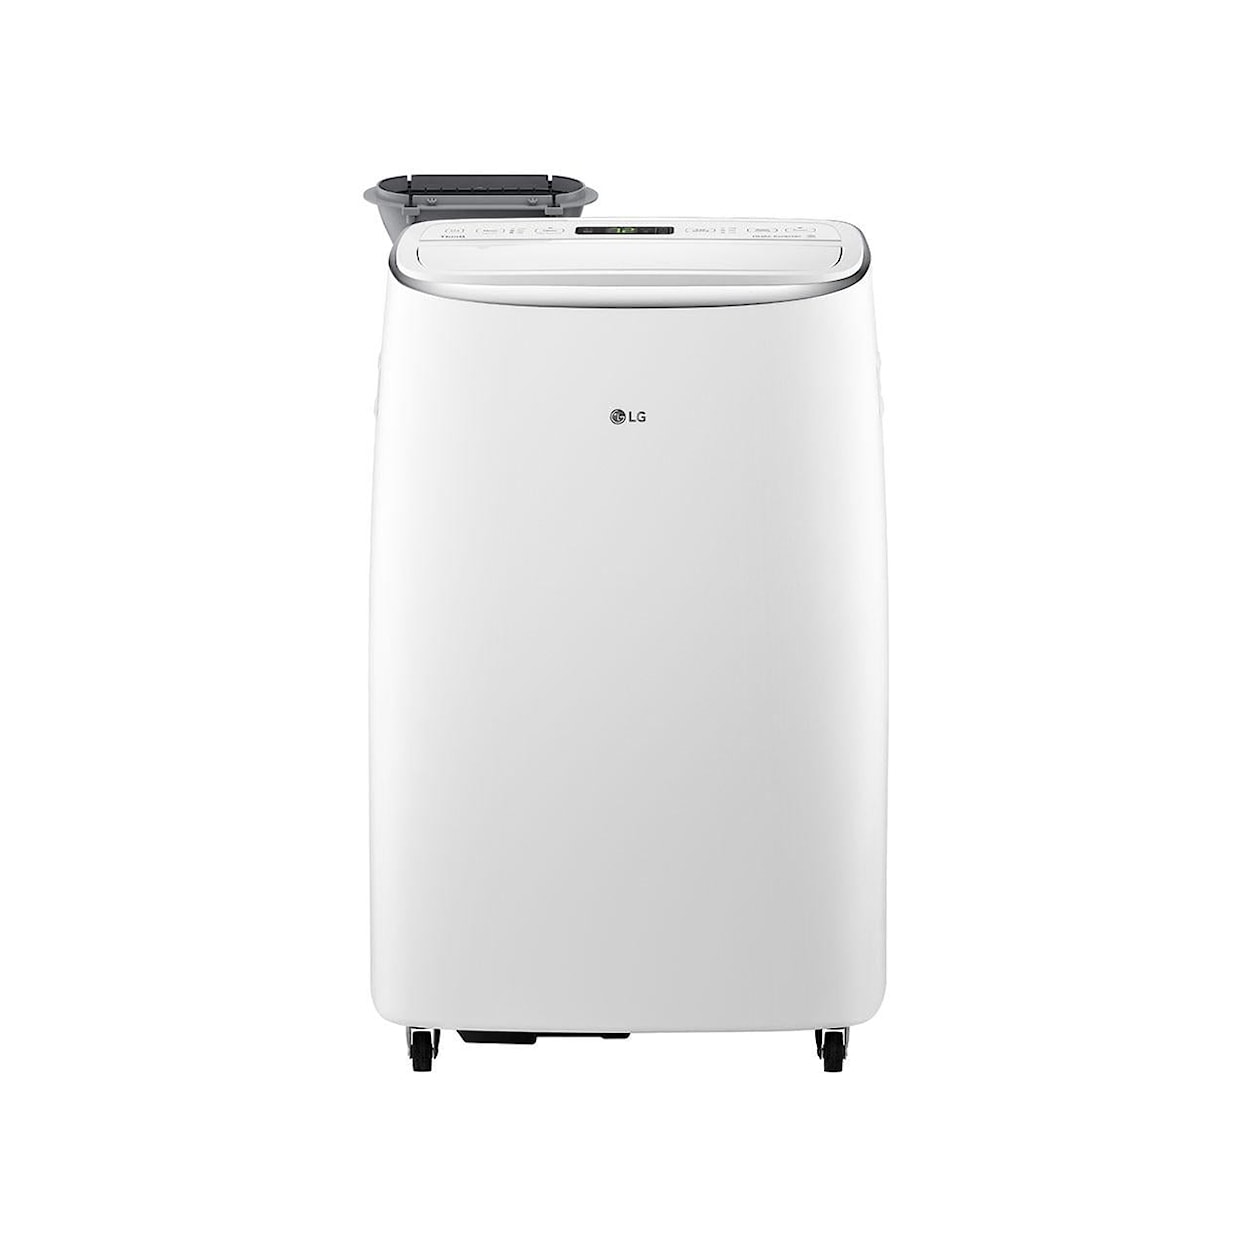 LG Appliances Air Conditioners Dining Tables